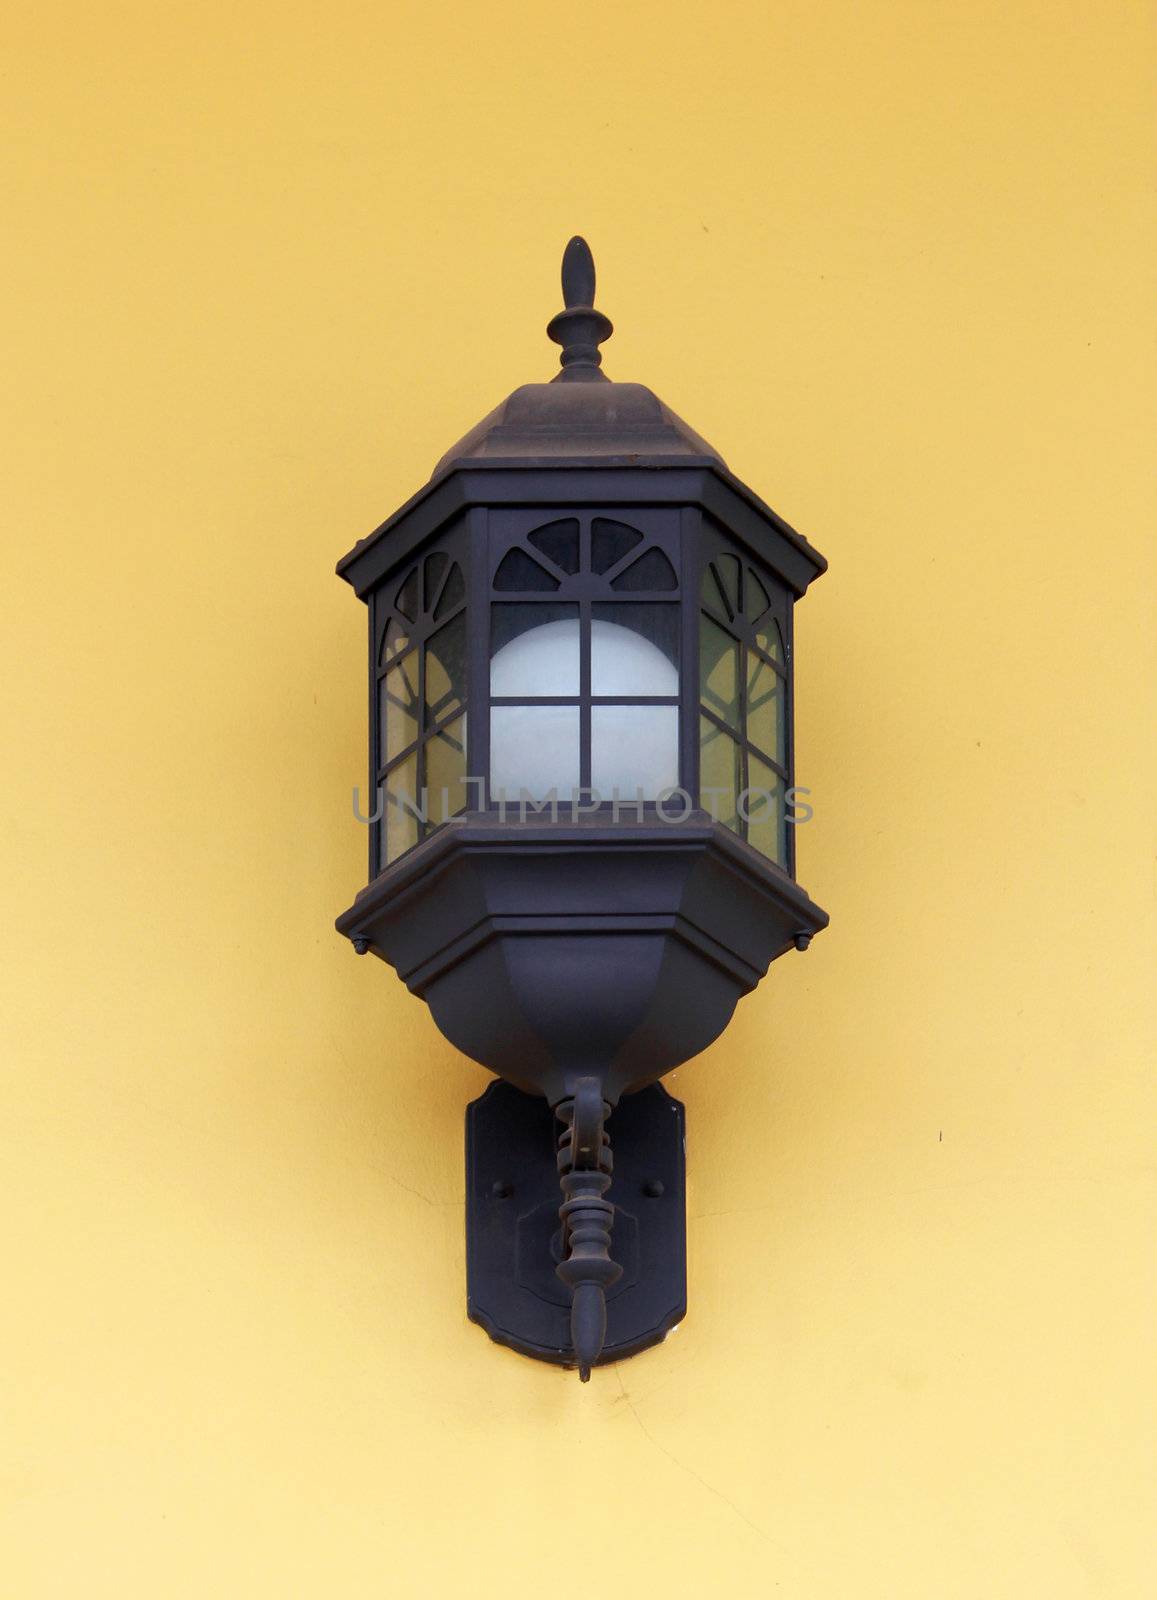 Vintage street lamp on yellow wall  by nuchylee